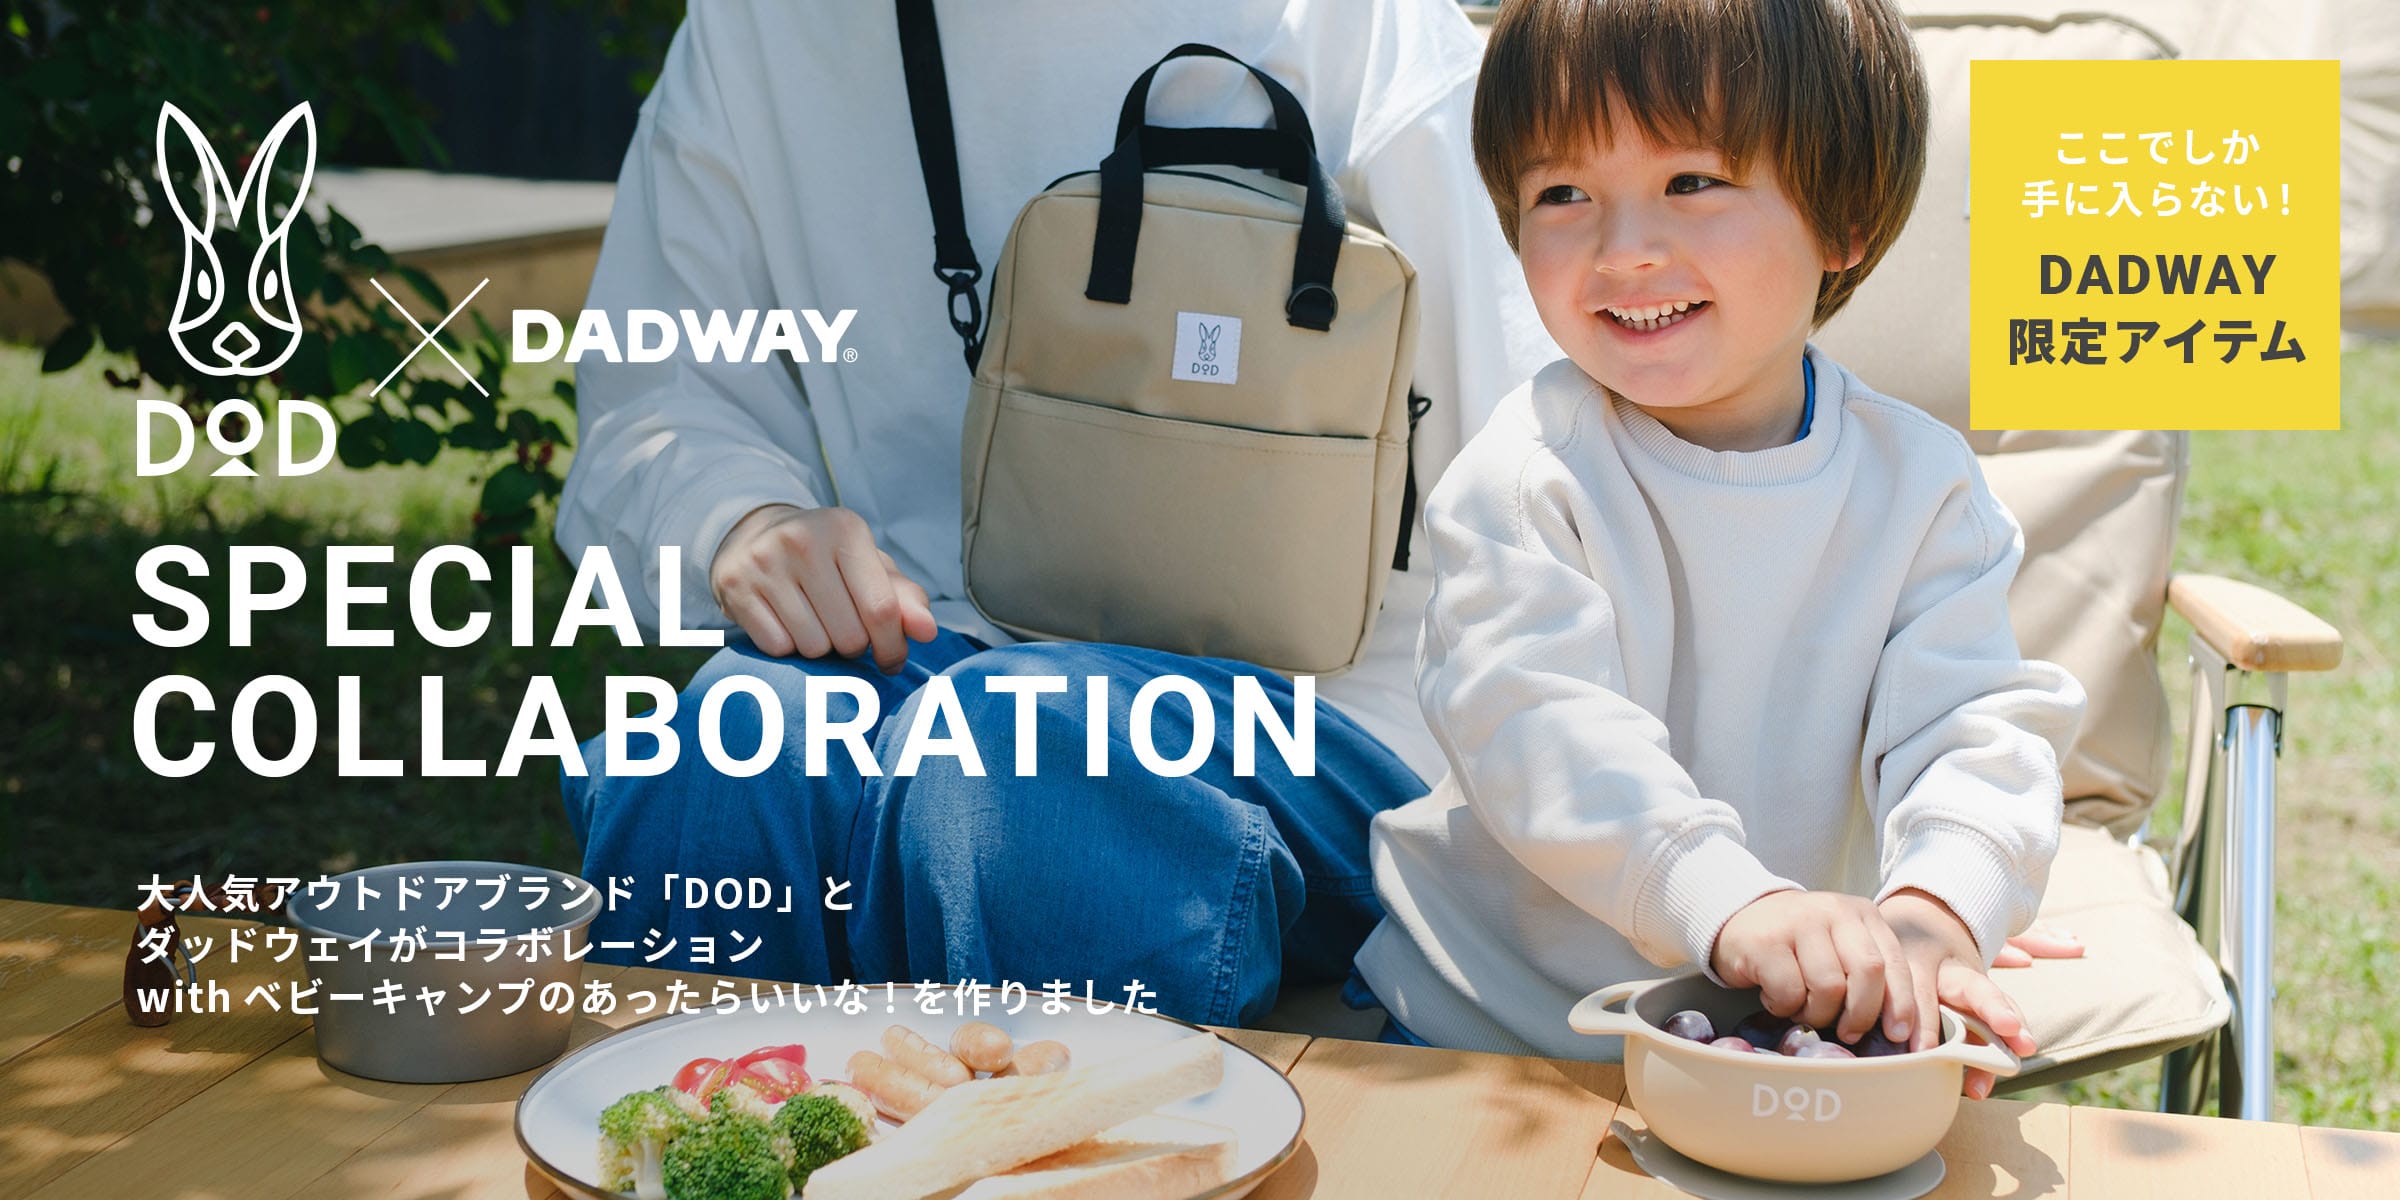 DOD×DADWAY SPECIAL COLLABORATION ここでしか手に入らない！DADWAY限定アイテム